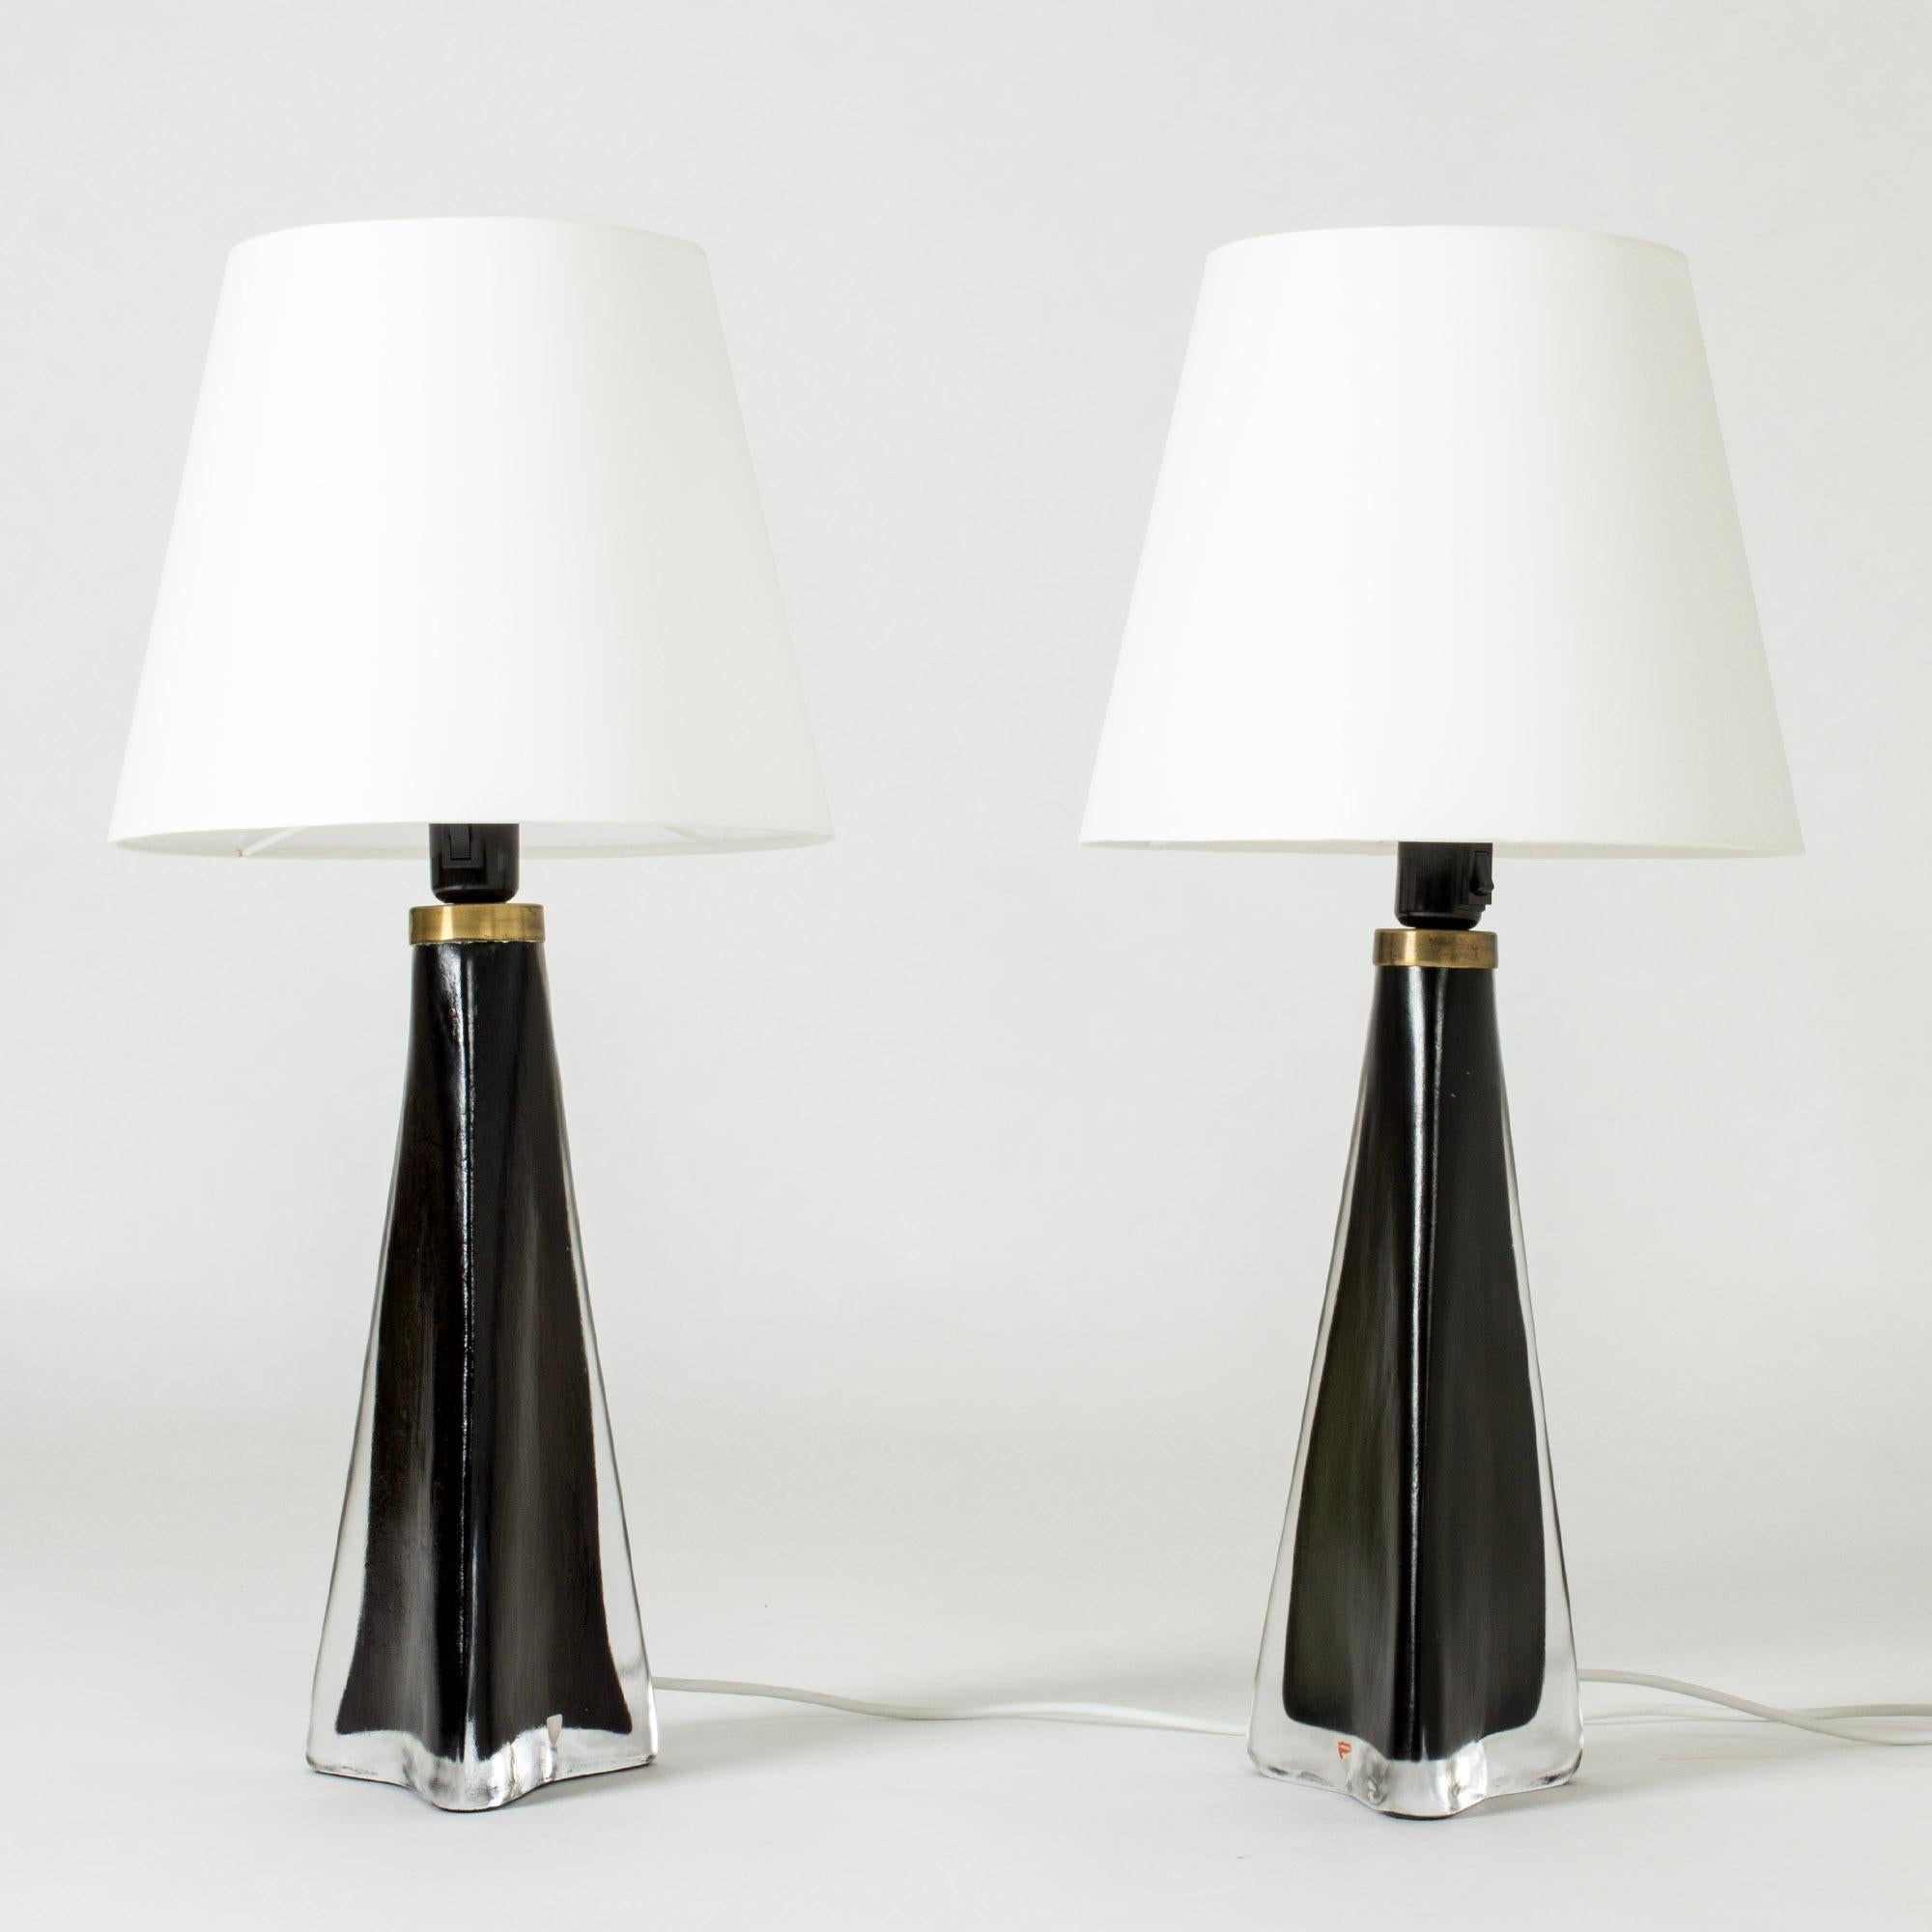 Swedish Midcentury Glass Table Lamps by Carl Fagerlund, Orrefors, Sweden, 1960s For Sale